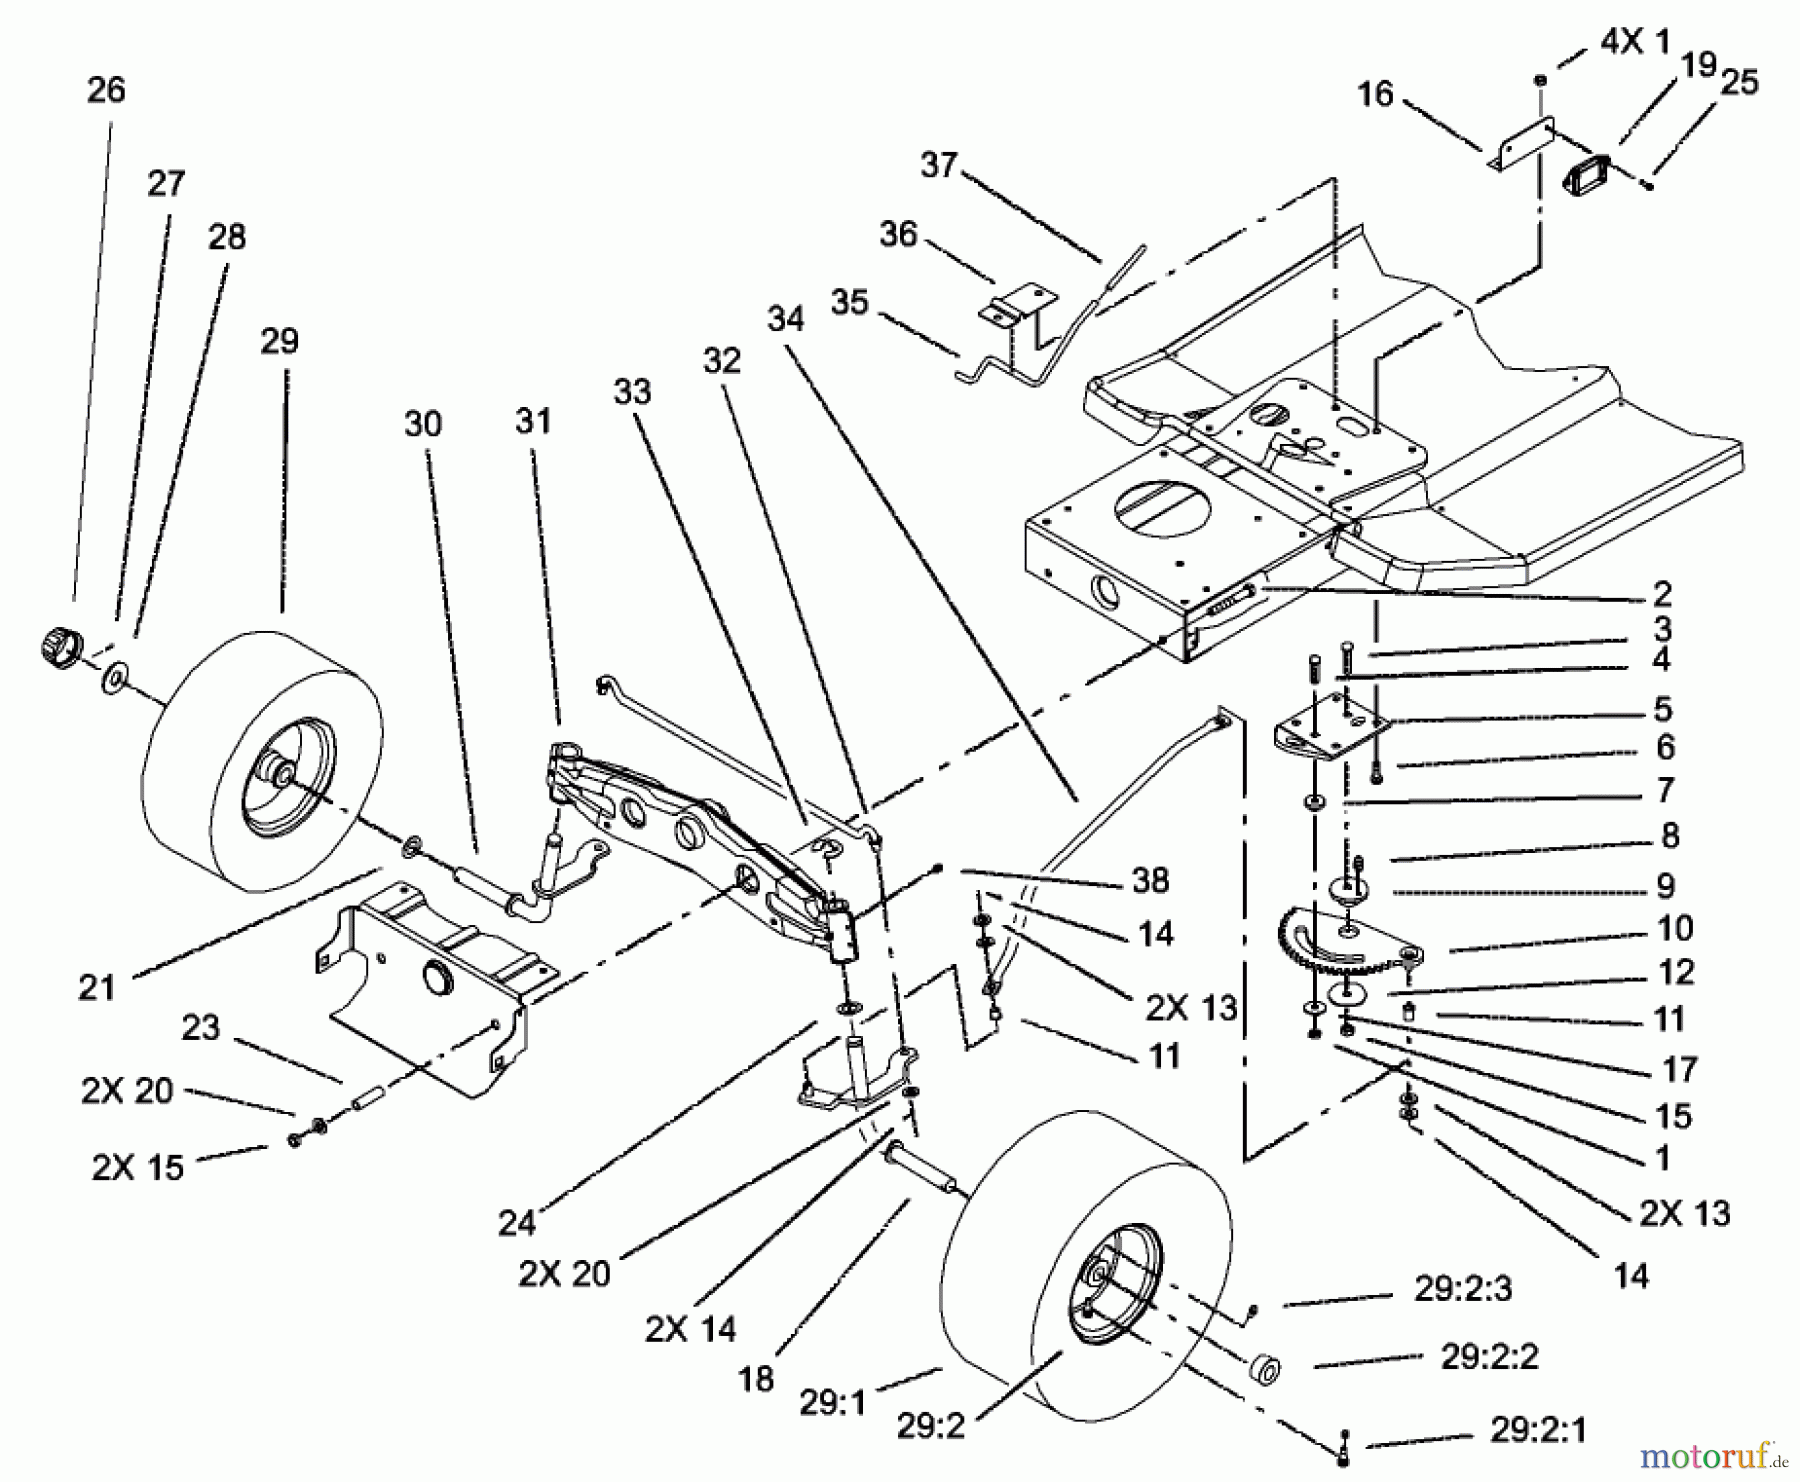  Toro Neu Mowers, Lawn & Garden Tractor Seite 1 71226 (16-38XLE) - Toro 16-38XLE Lawn Tractor, 2002 (220010001-220999999) STEERING ASSEMBLY